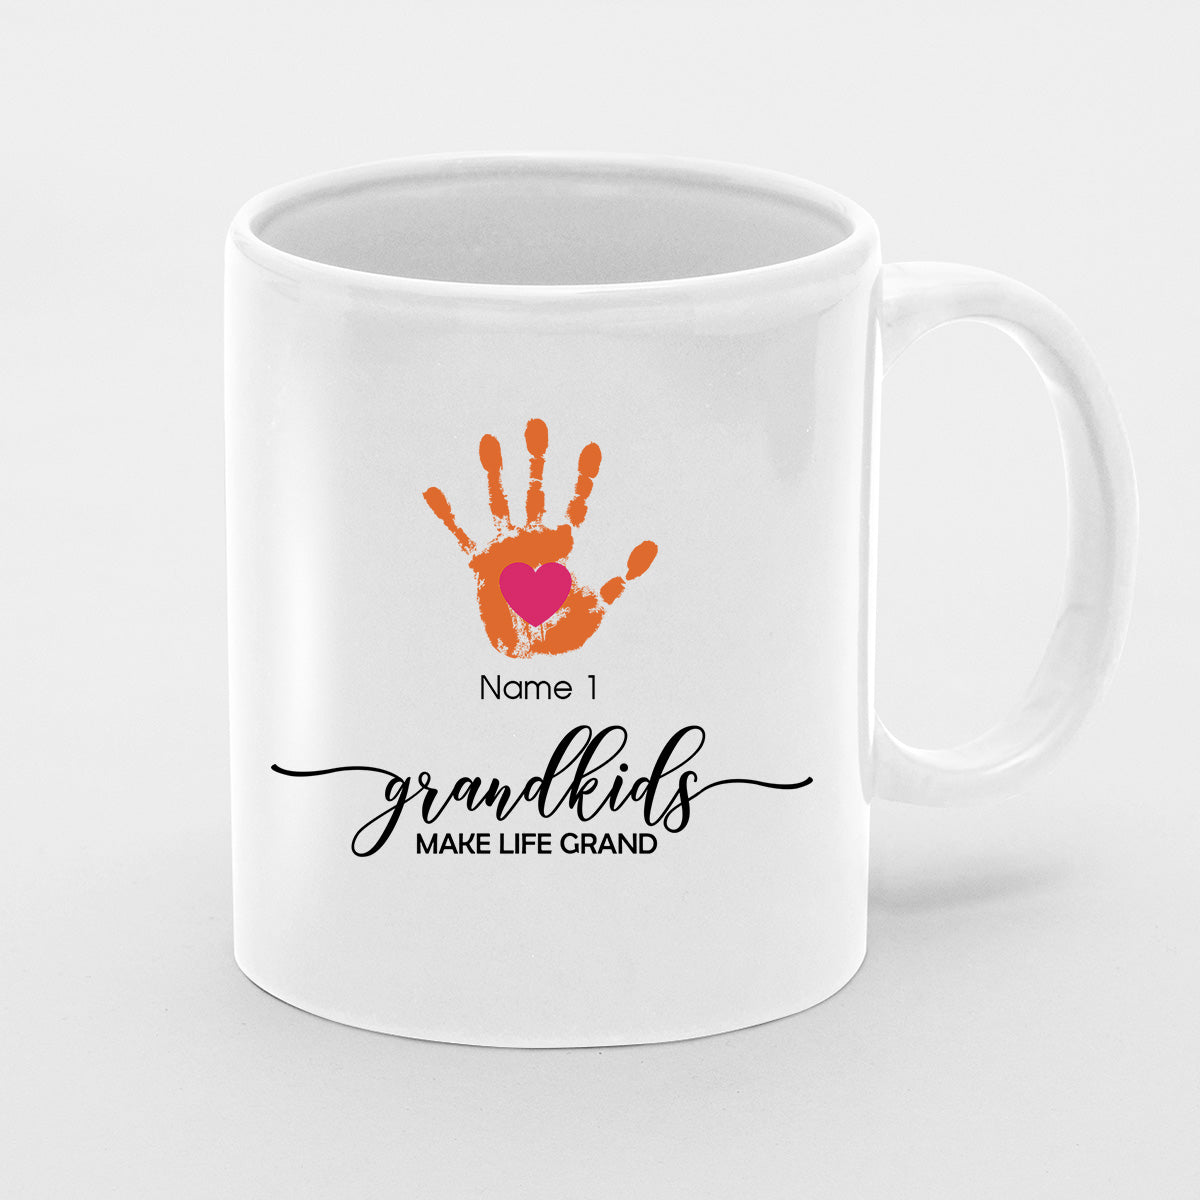 Personalised Mother's Day Mug, Nanny Gift, Best Nan Mug, Mummy Mug, Personalised Mug, New Nanny Mug , First Mothers Day, New Mum Gift, Grandkids Make Life Grand